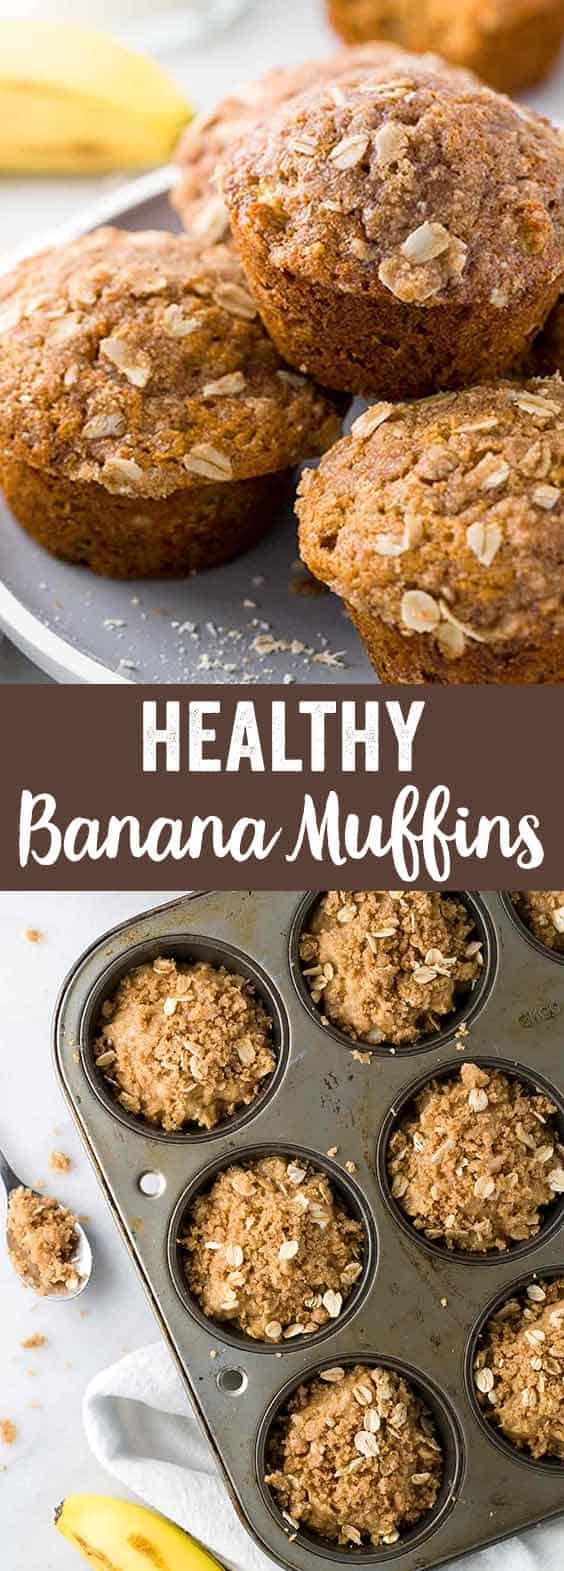 Are Rolled Oats Healthy
 Healthy Banana Muffins with Old Fashioned Oats